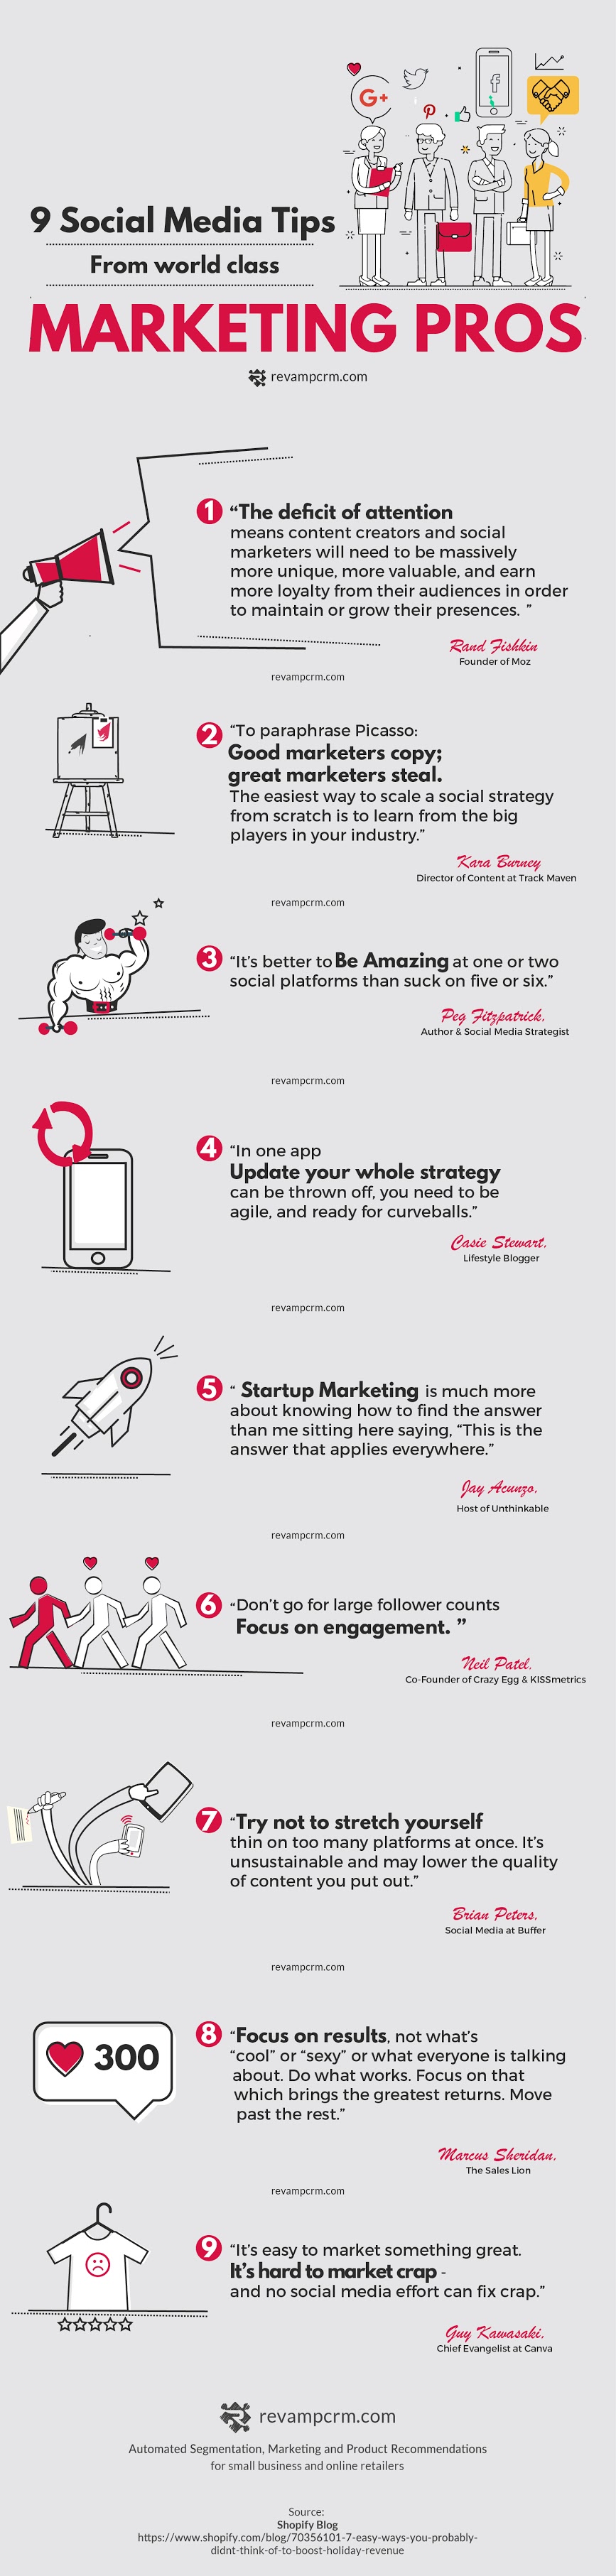 Social Media Marketing Tips From the Pros - infographic